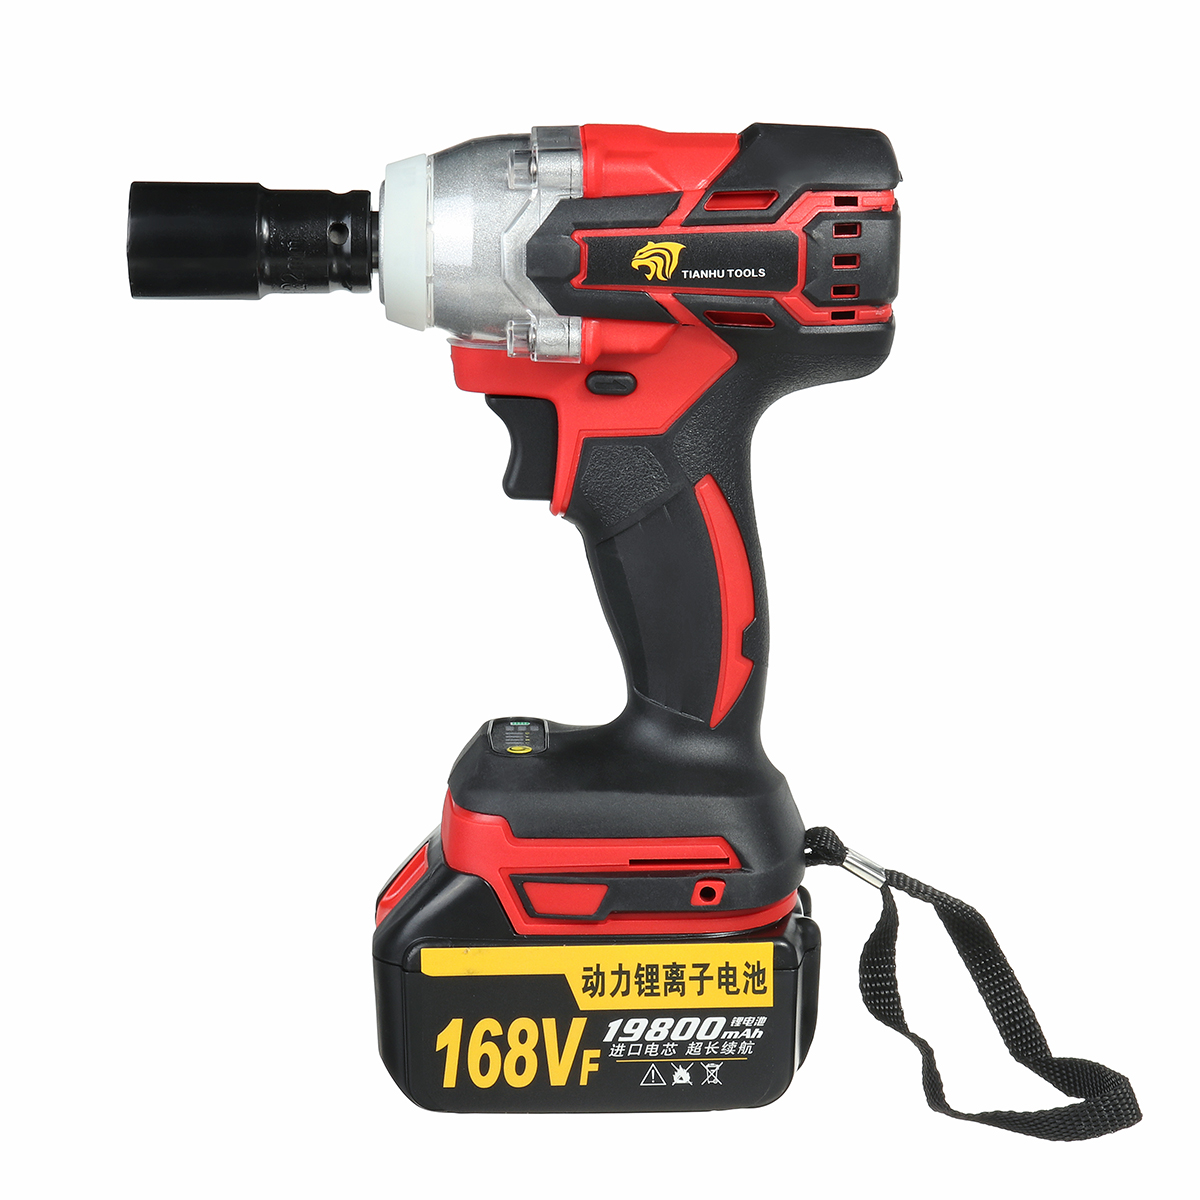 168VF-520Nm-High-Torque-Electric-Cordless-Brushless--Impact-Wrench-Tool-with-Rechargeable-Battery-1785233-5